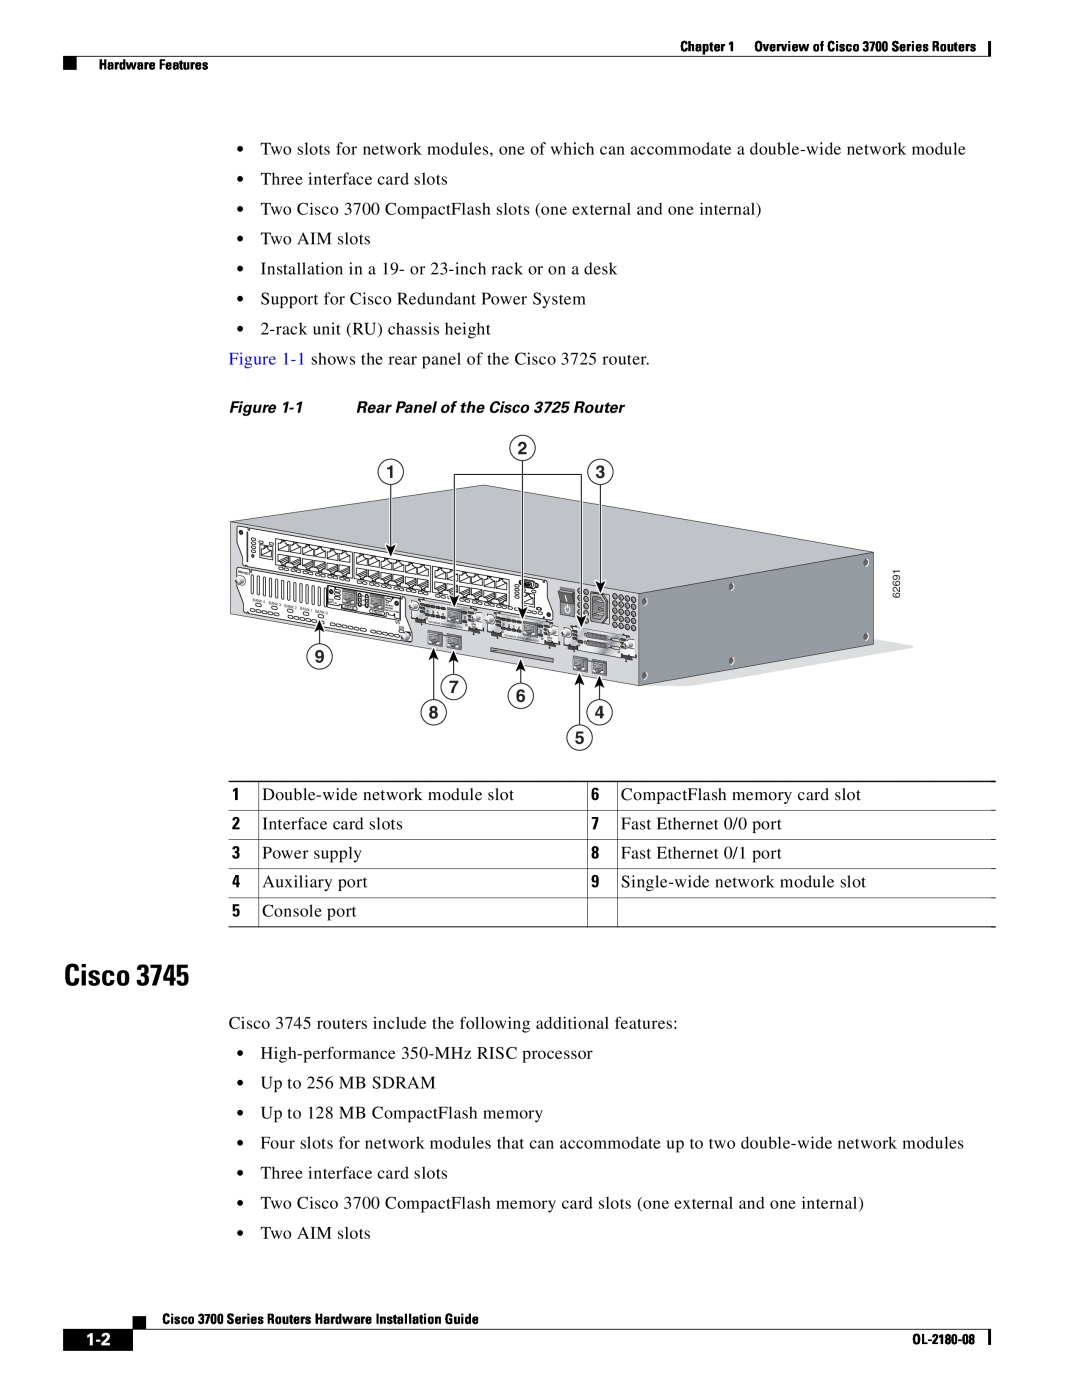 Cisco Systems 3700 Series manual Rear Panel of the Cisco 3725 Router, Bank 